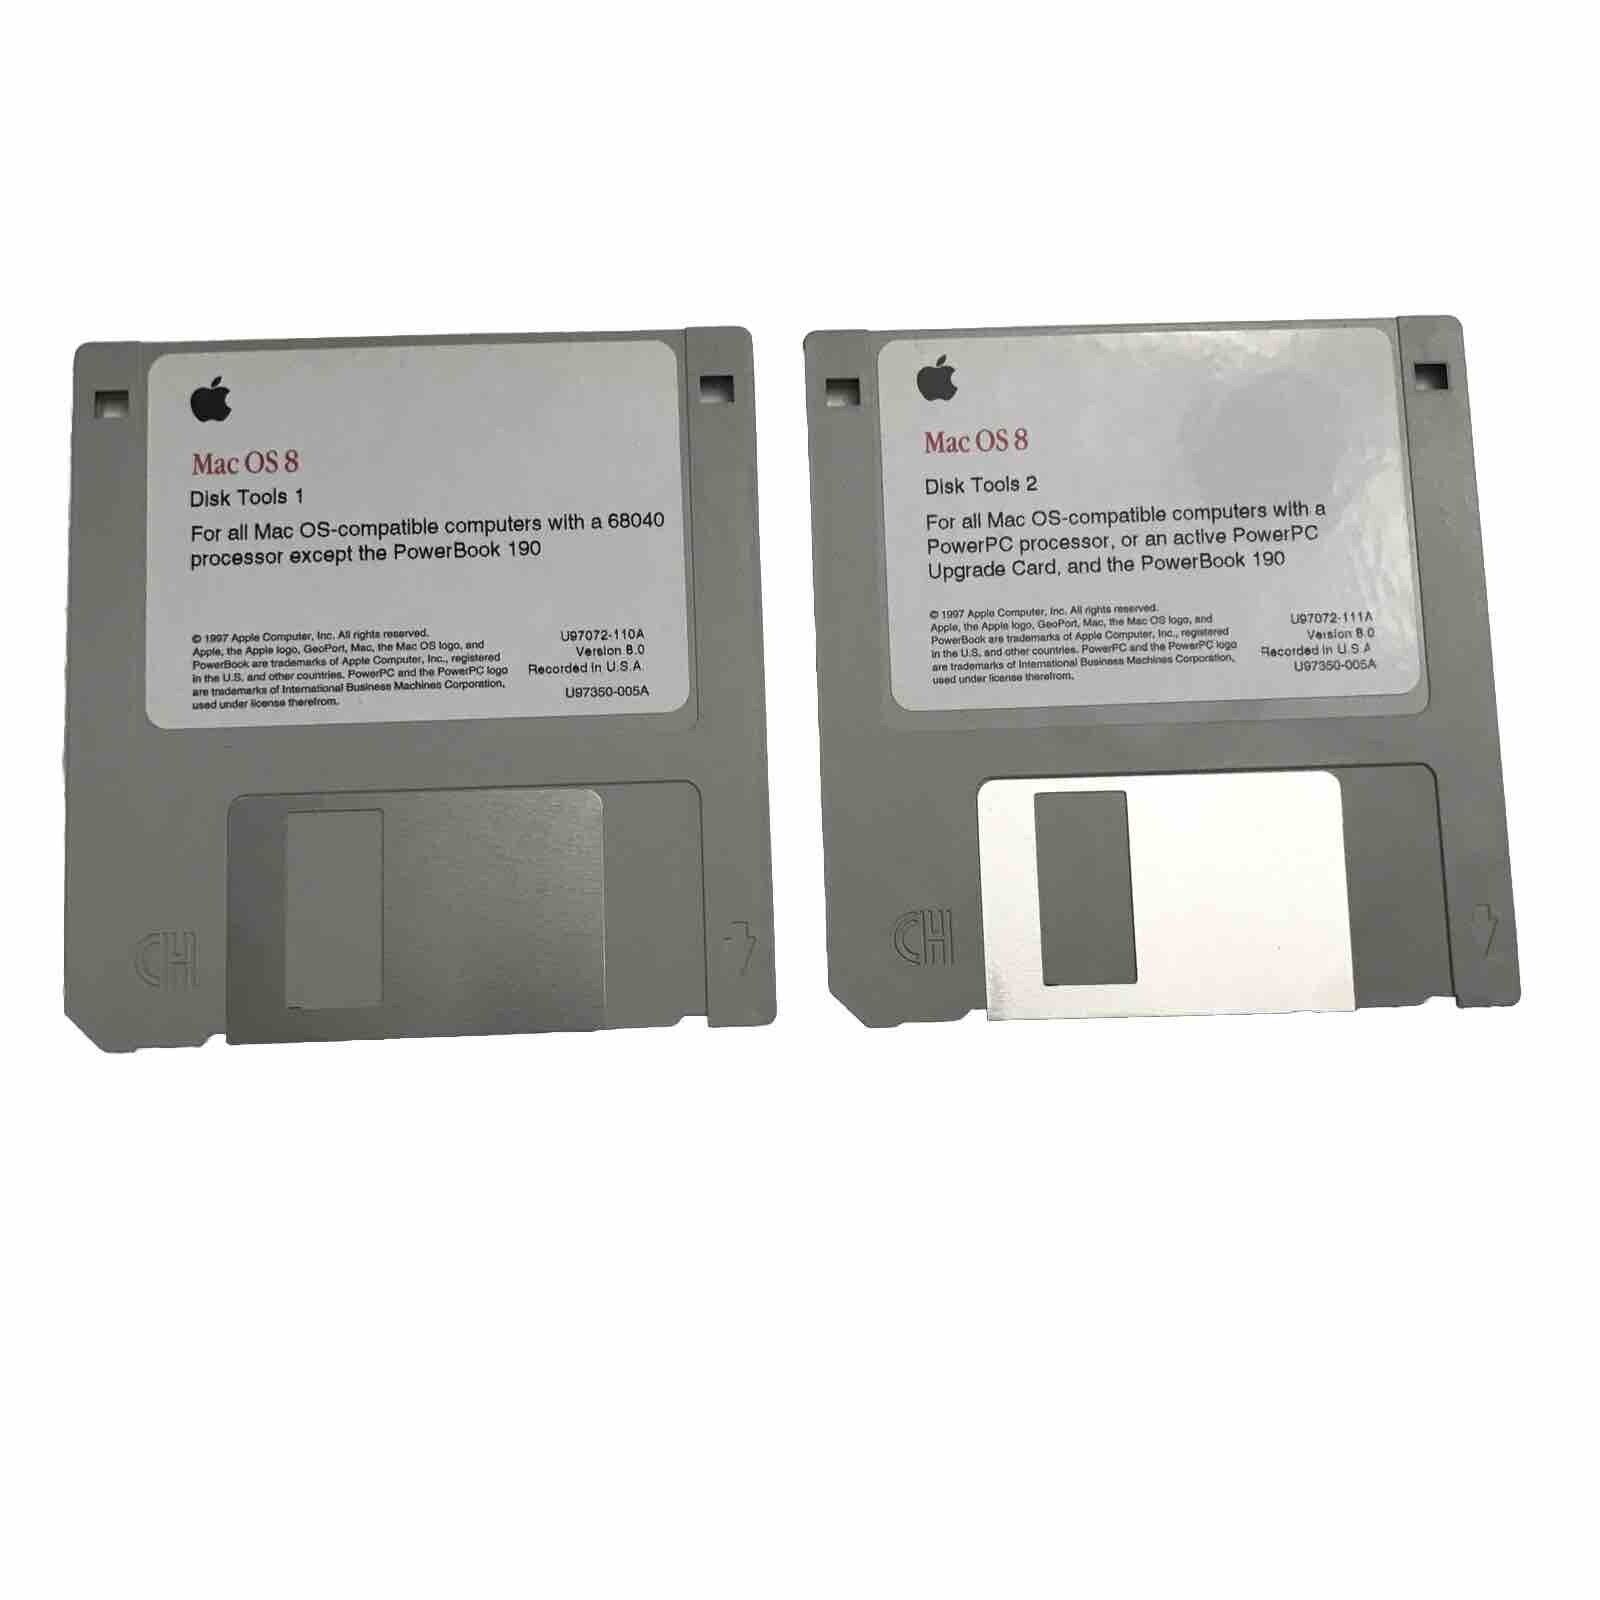 Vtg Apple Mac OS8 Disk Tools 1 & 2 Floppy Discs Tested & Readable